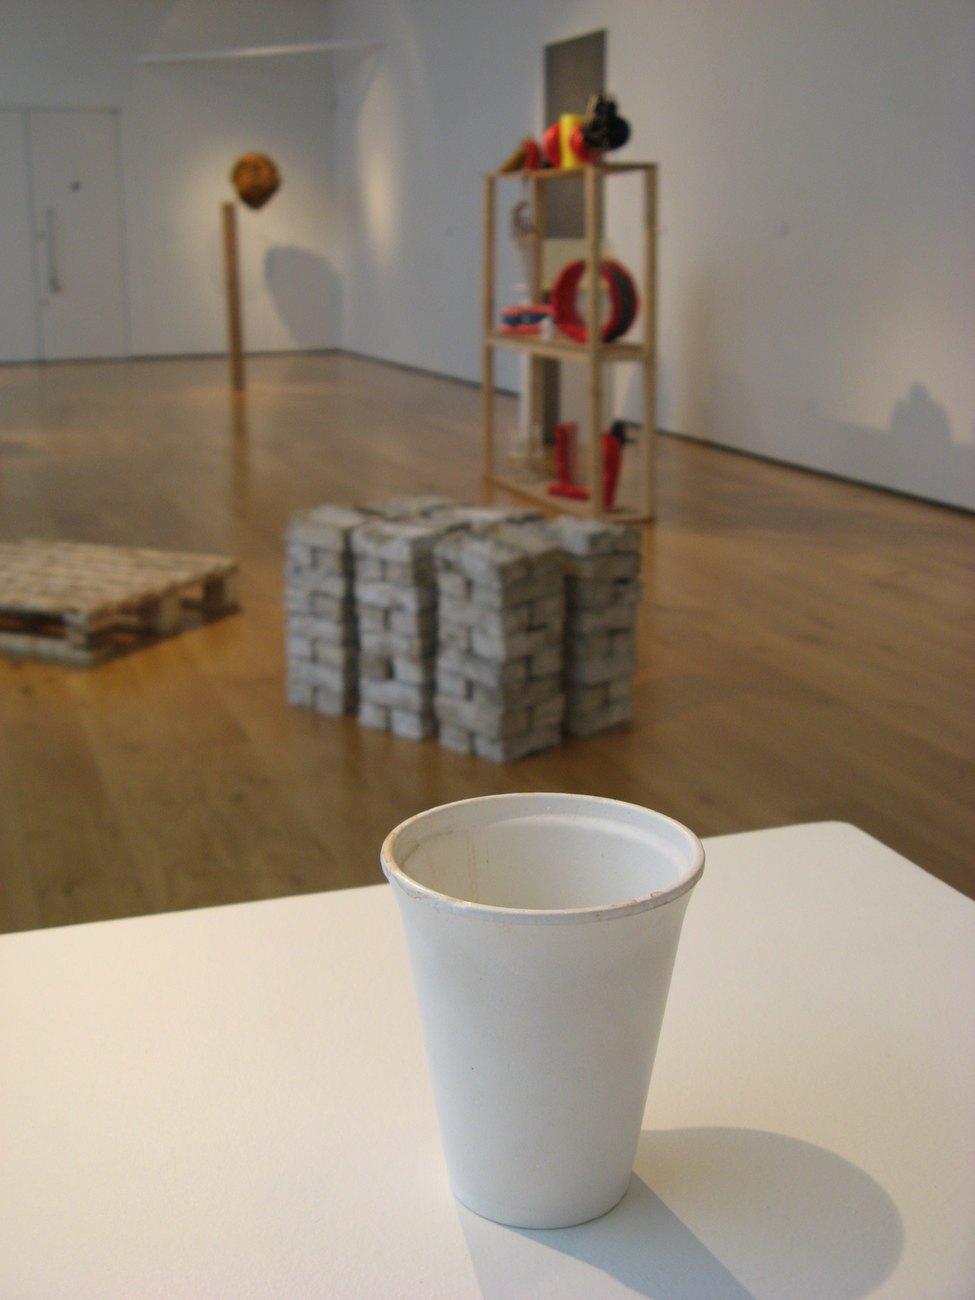 A bronze cast of a polystyrene cup by Gavin Turk